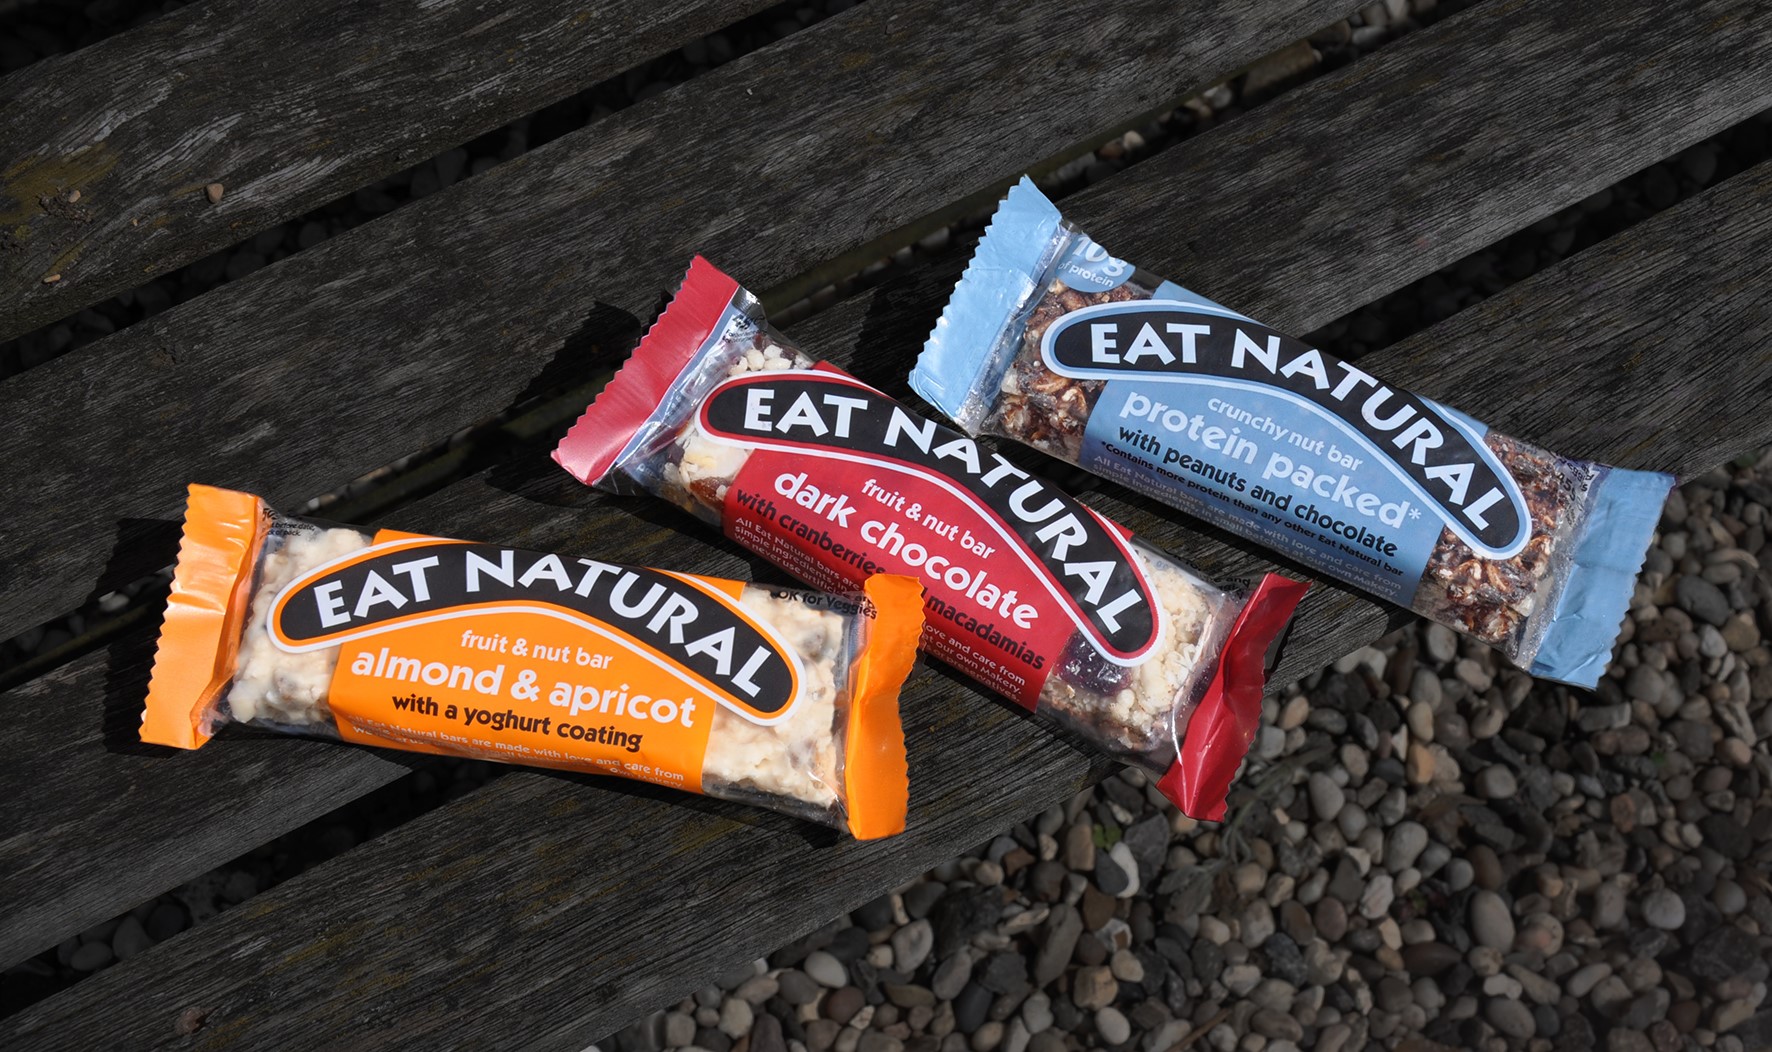 Ferrero Group set to acquire Eat Natural